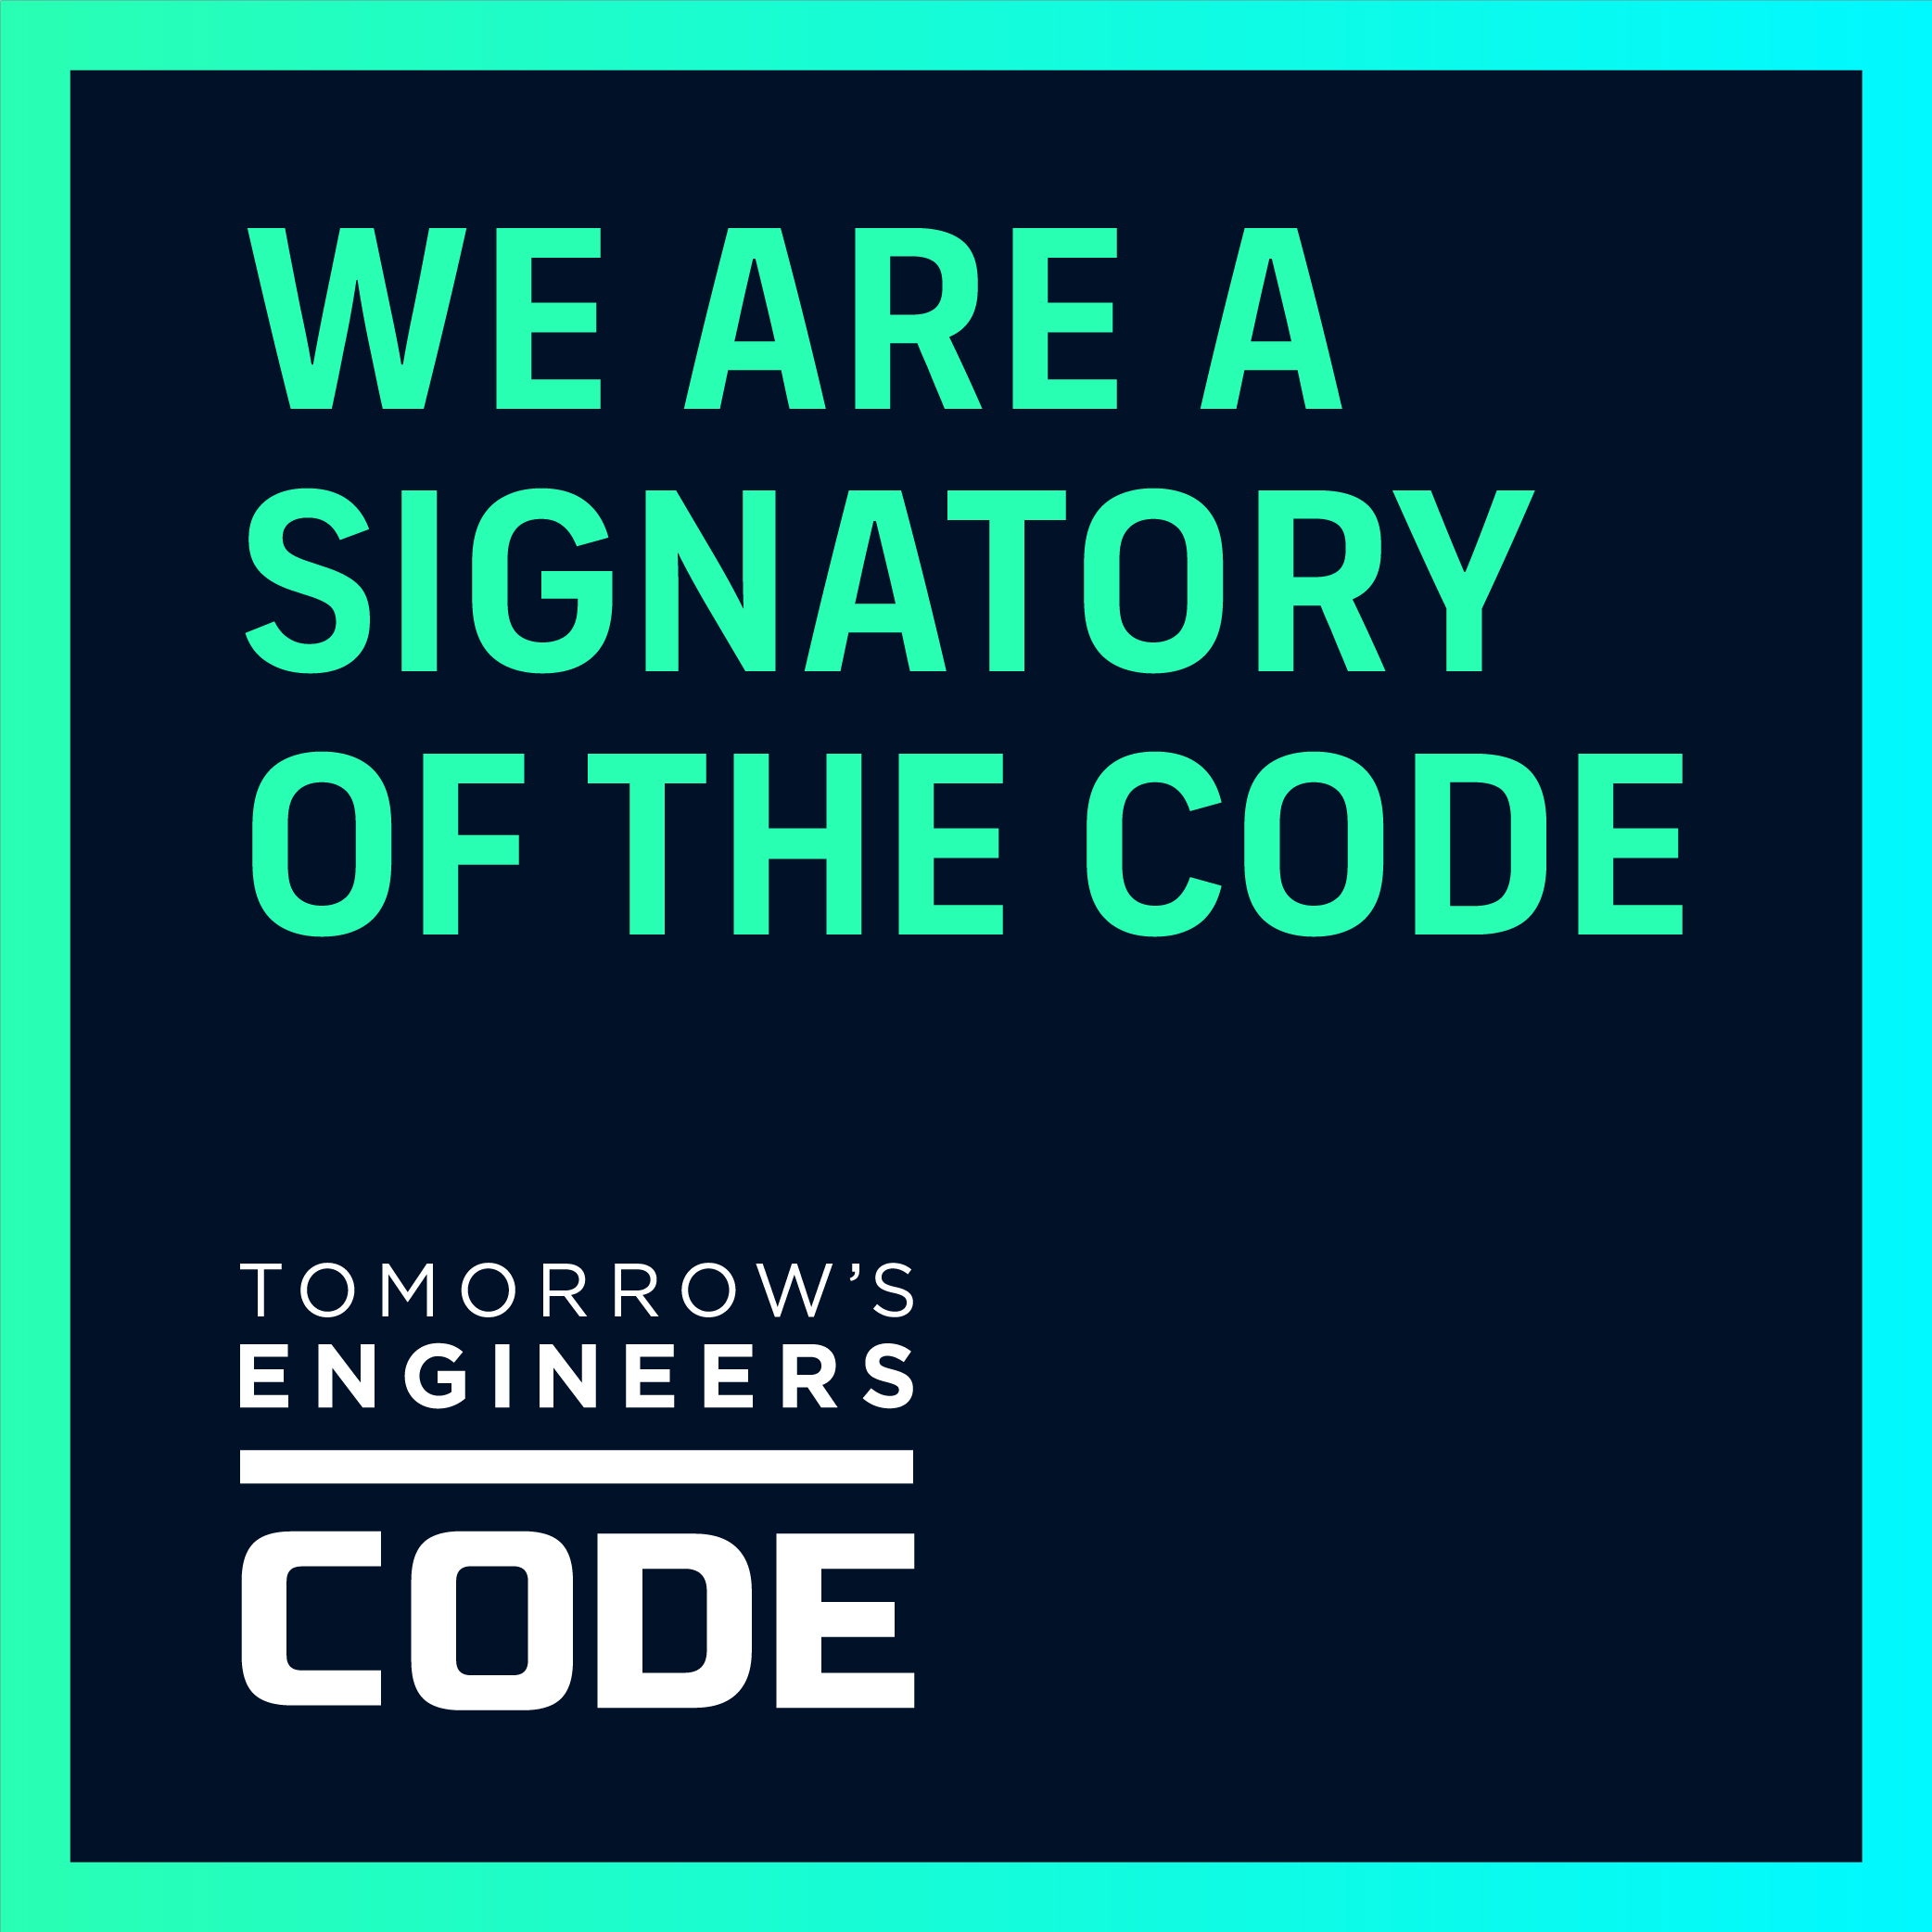 ONTIC SIGNS THE TOMORROW’S ENGINEERS CODE